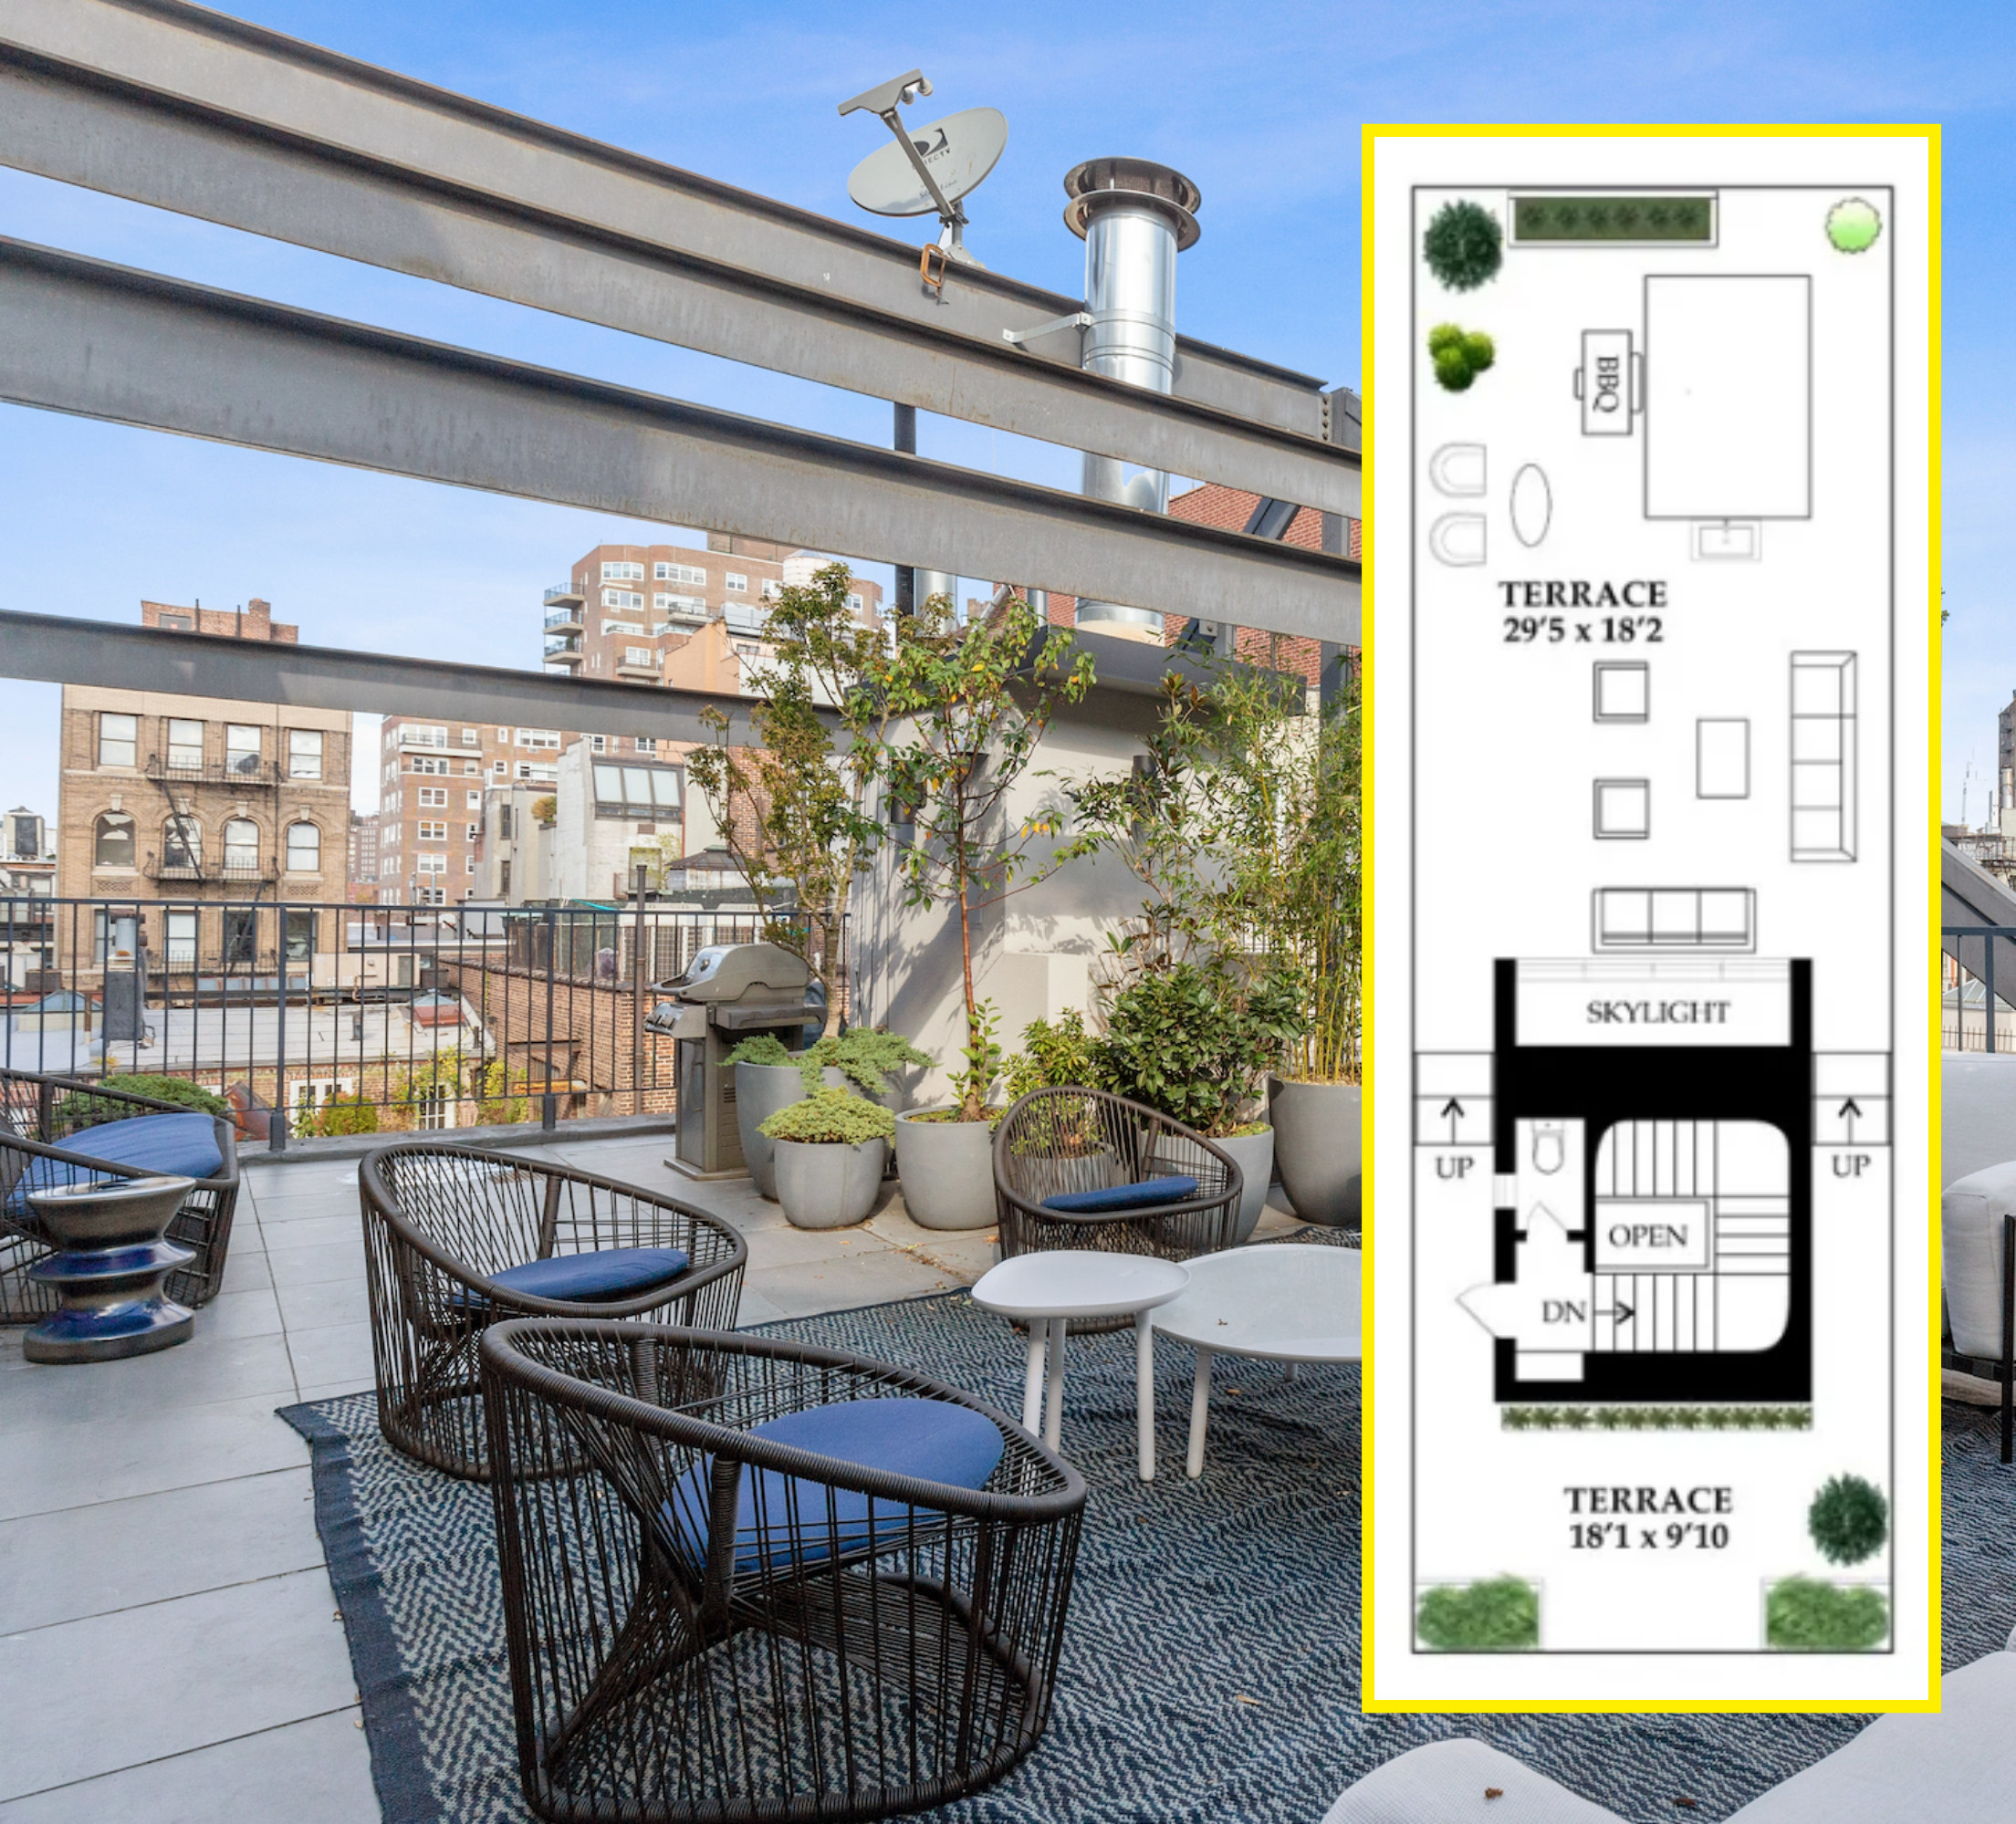 floor plan of the rooftop terrace and the view